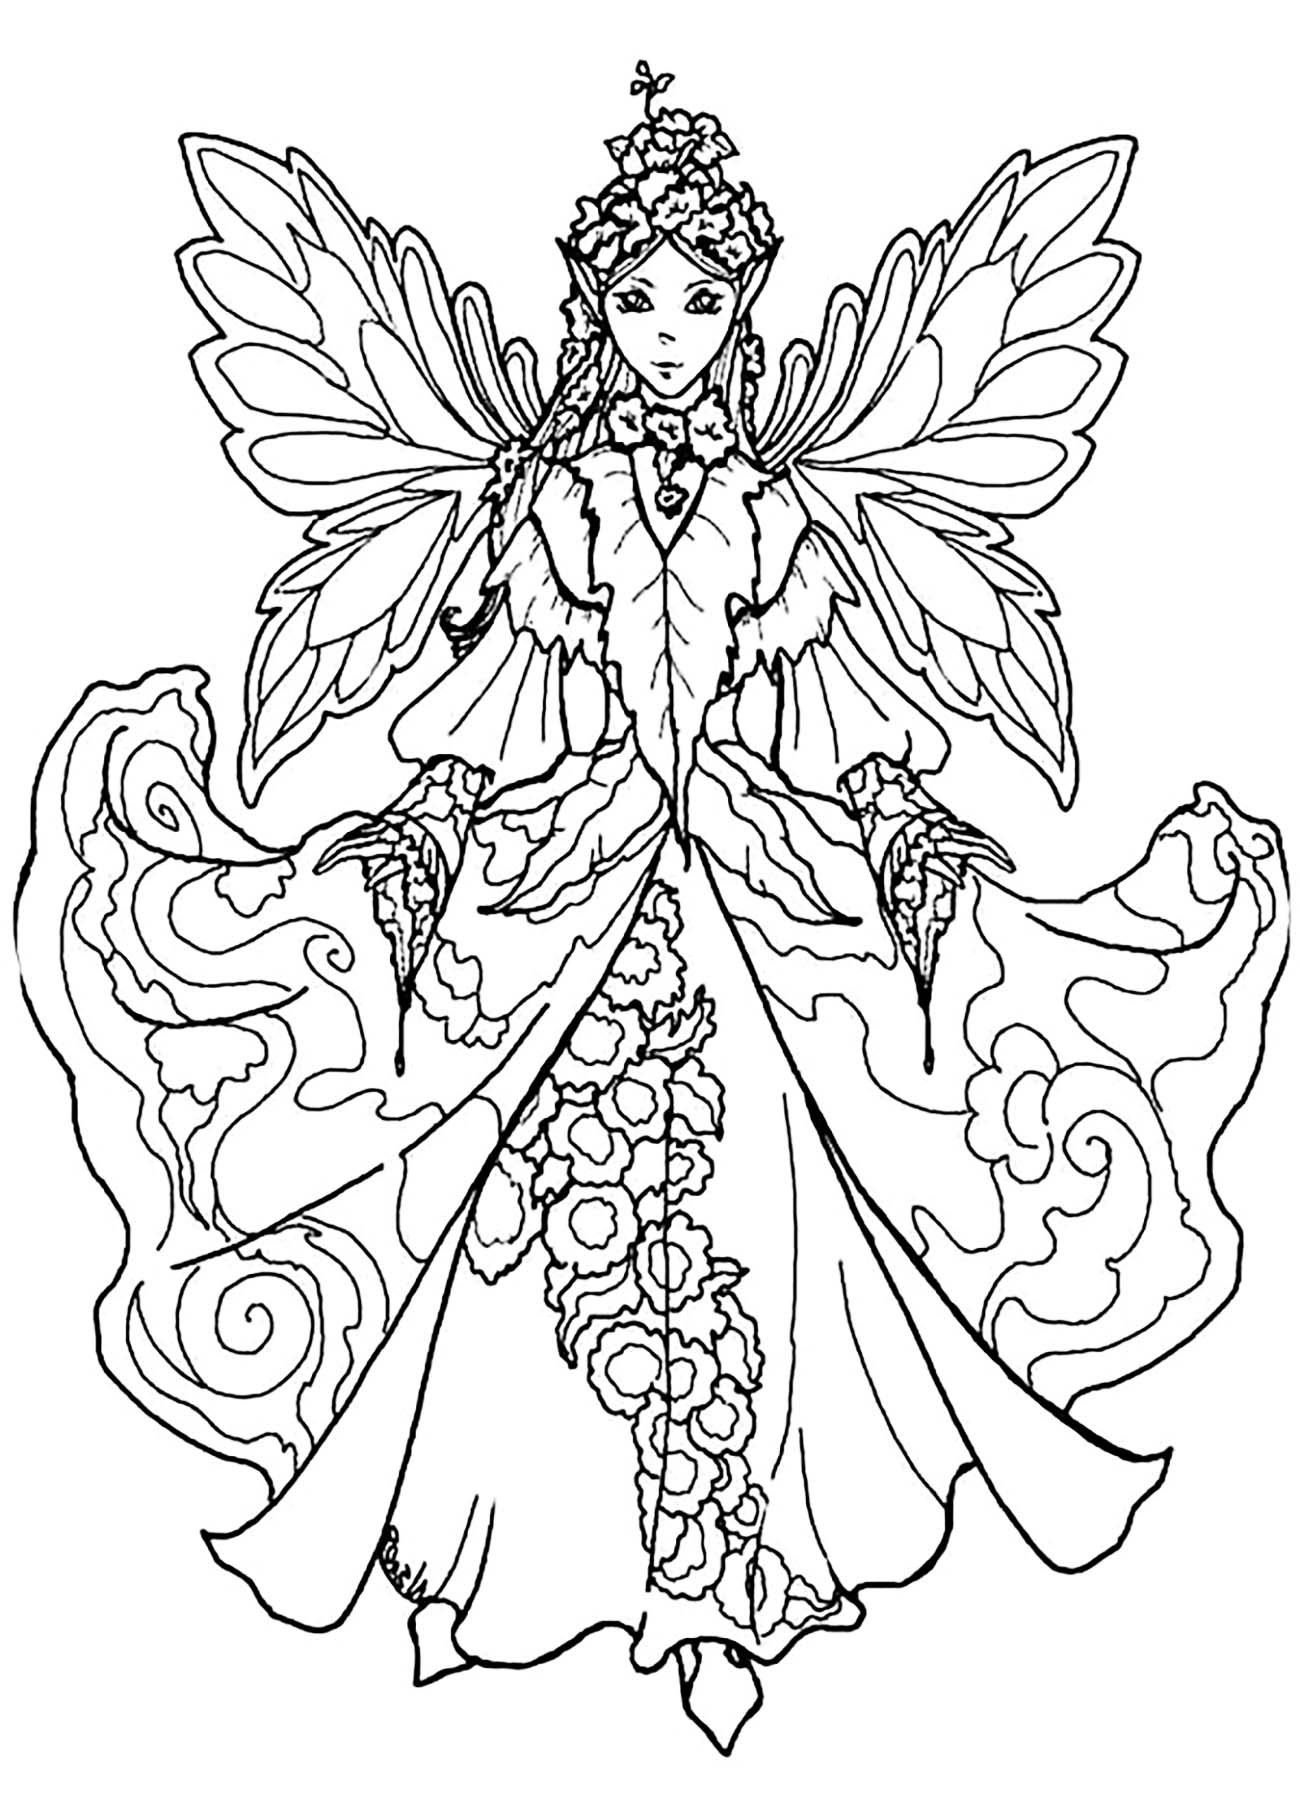 Fairy Coloring Pages for Adults Best Coloring Pages For Kids